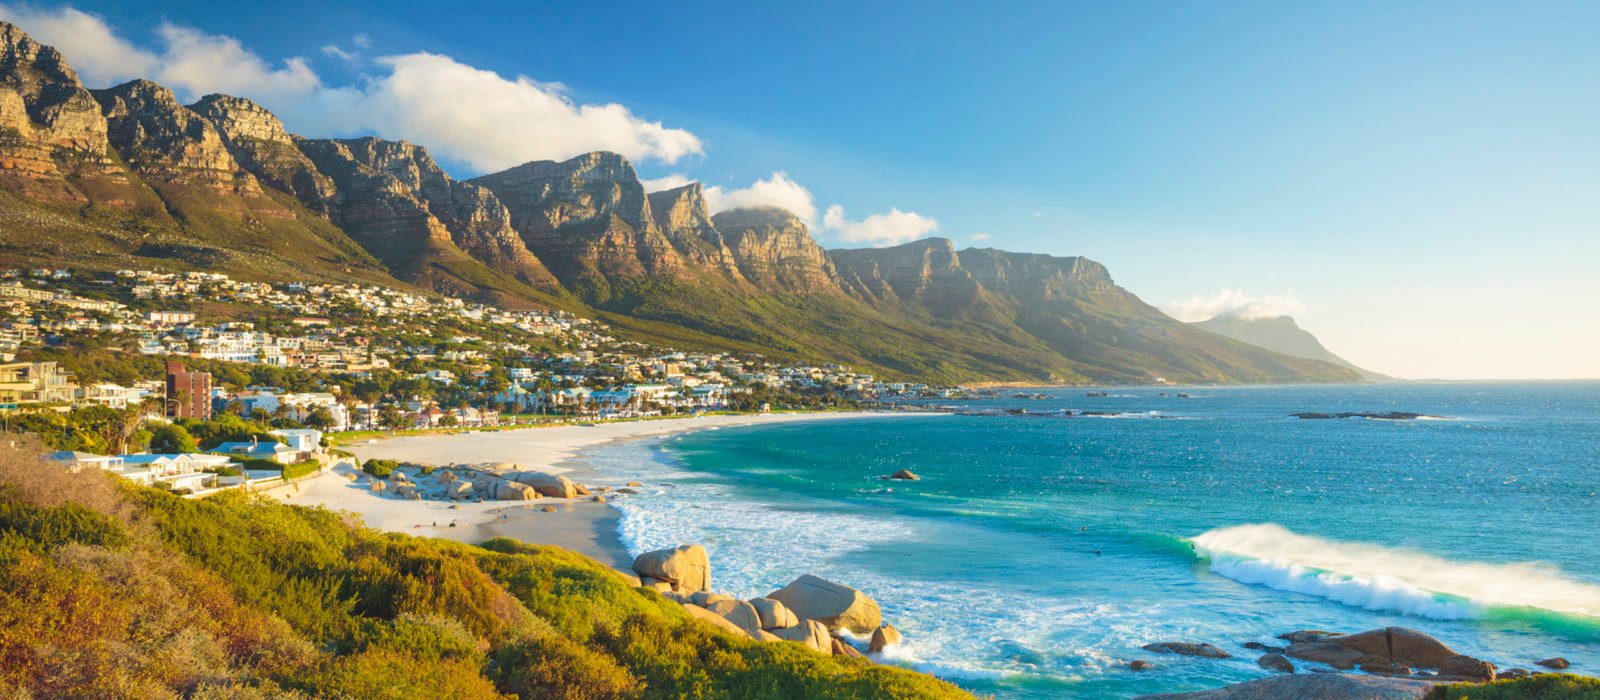 Twelve Apostles Mountain, Camps Bay, Cape Town, South Africa